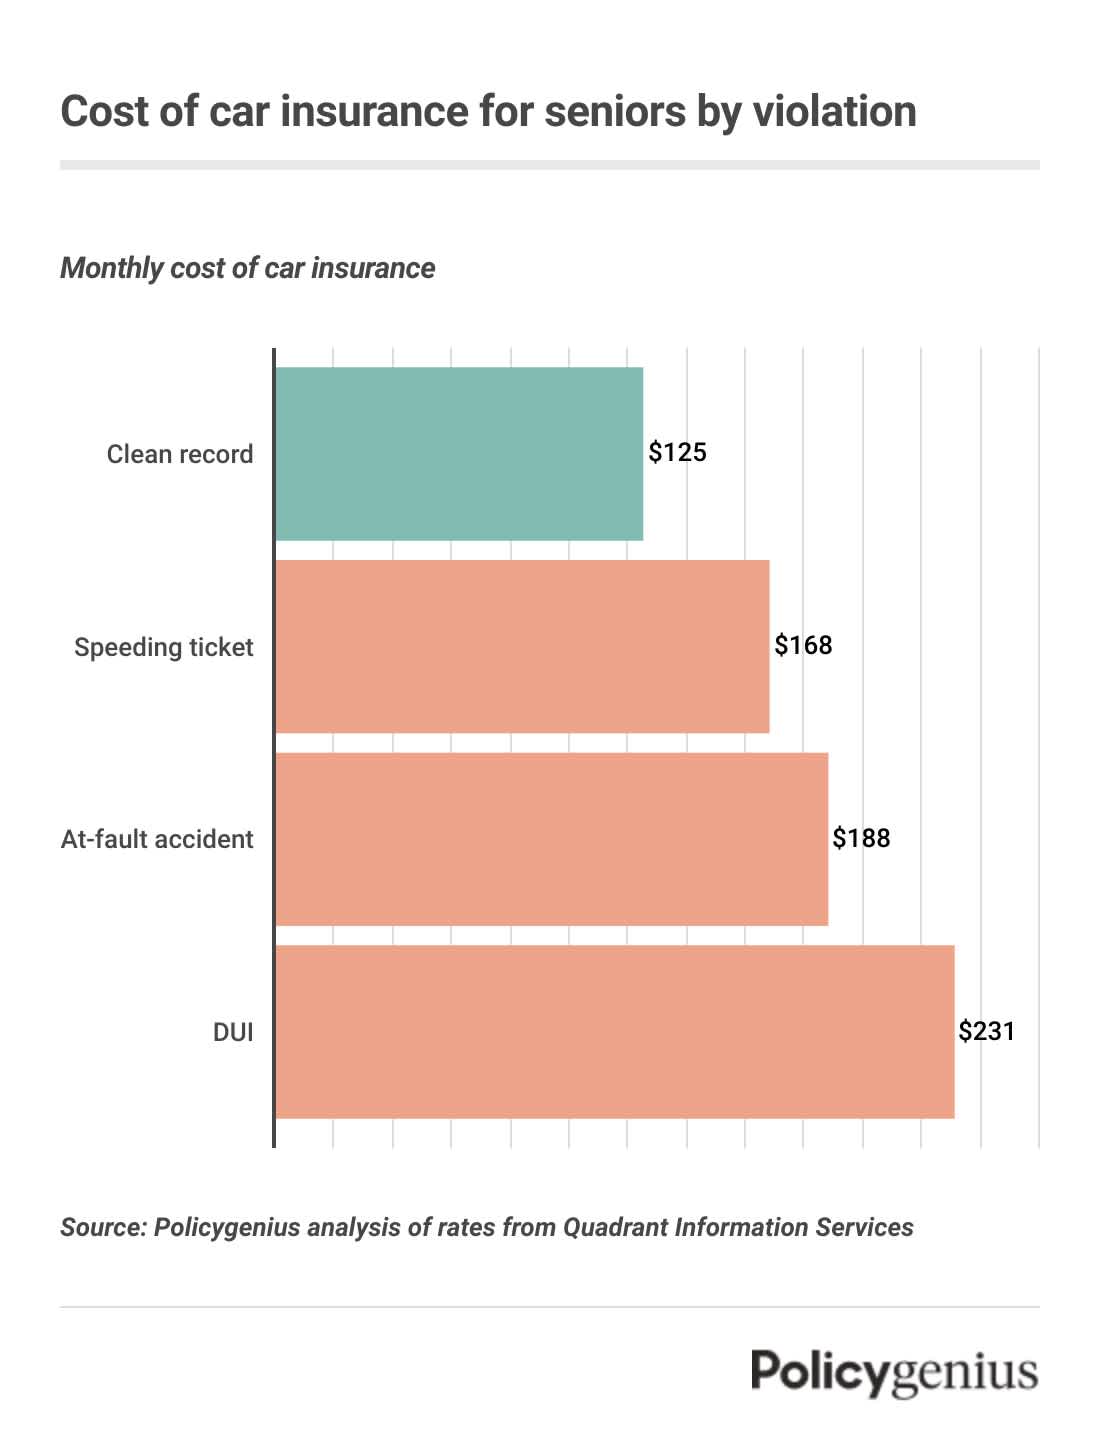 A bar graph showing the cost of car insurance for seniors with different driving violations.